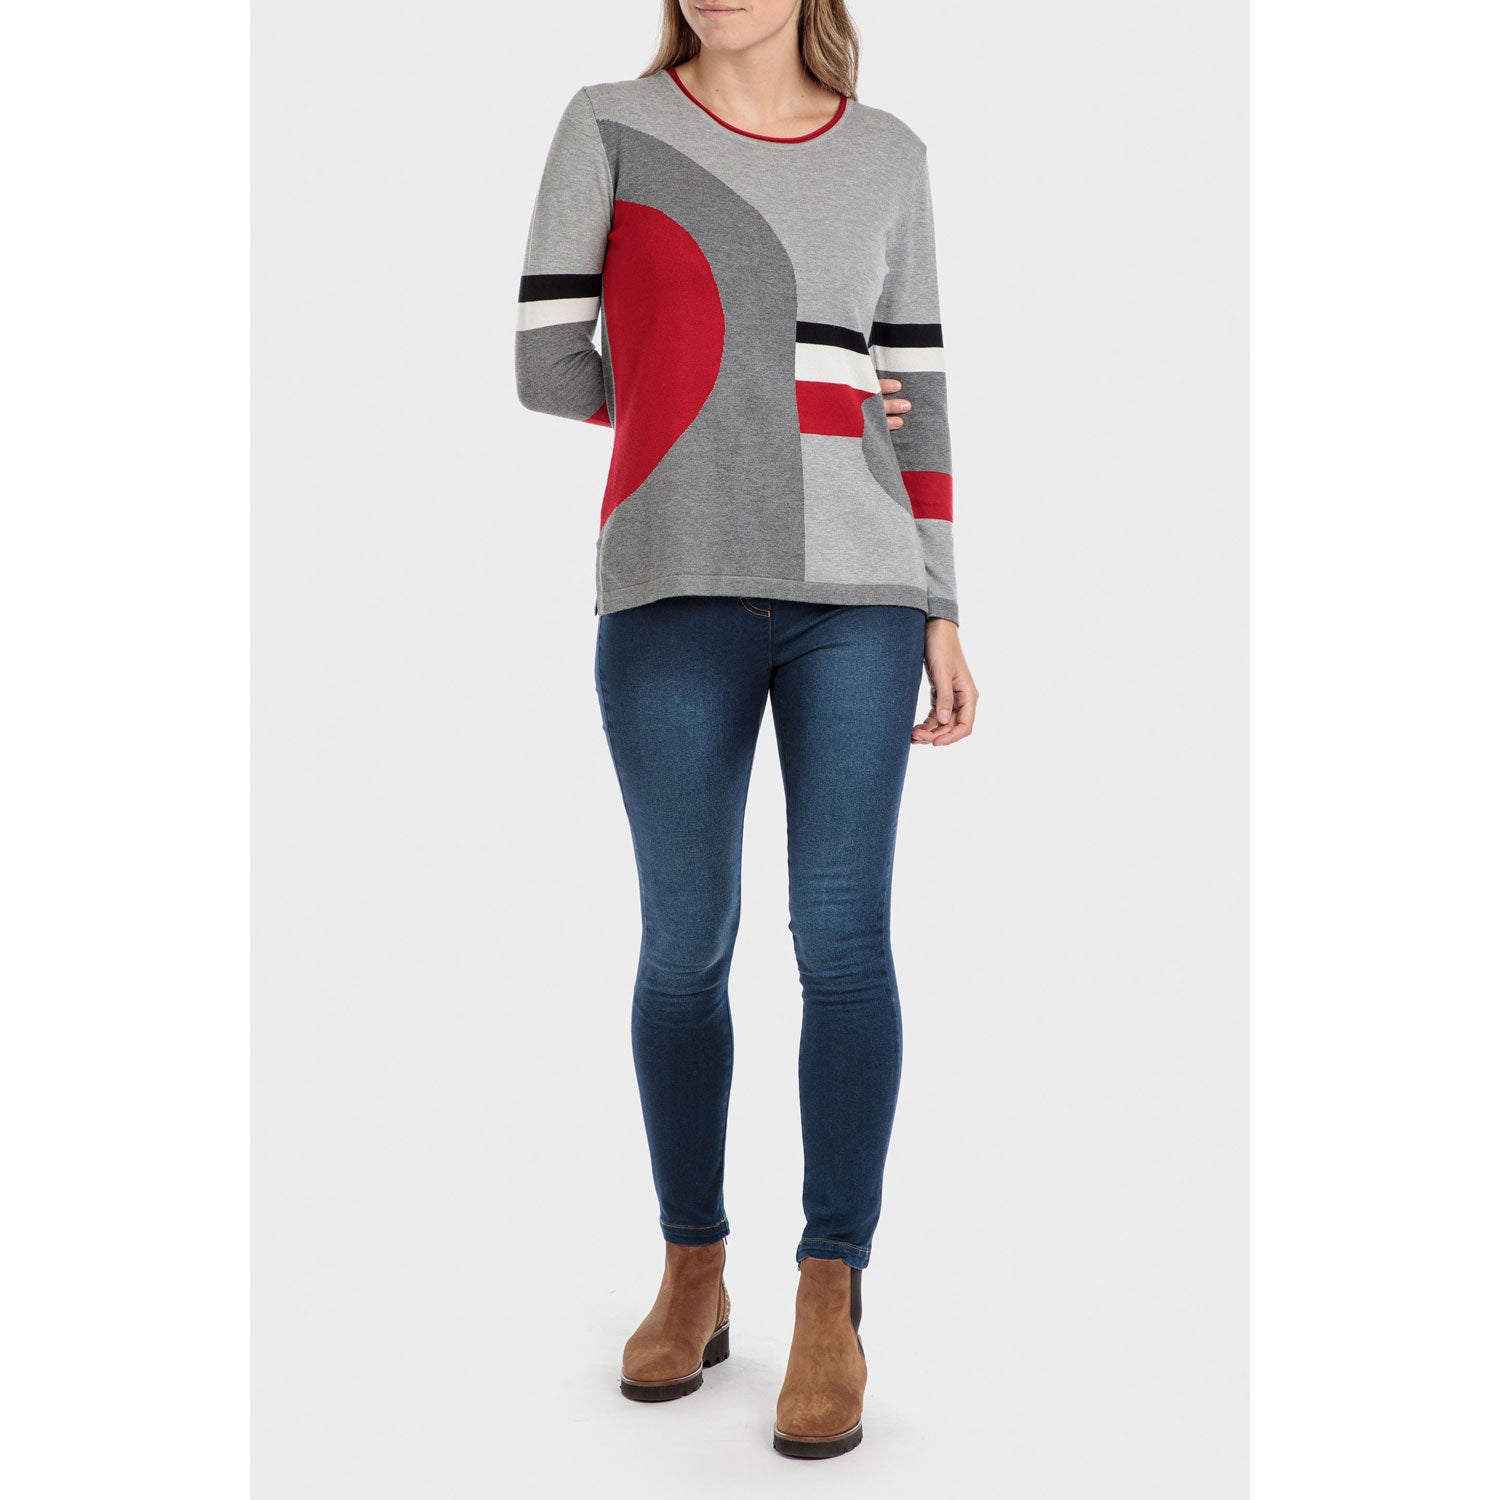 Punt Roma Intarsia Sweater - Grey/Red 3 Shaws Department Stores